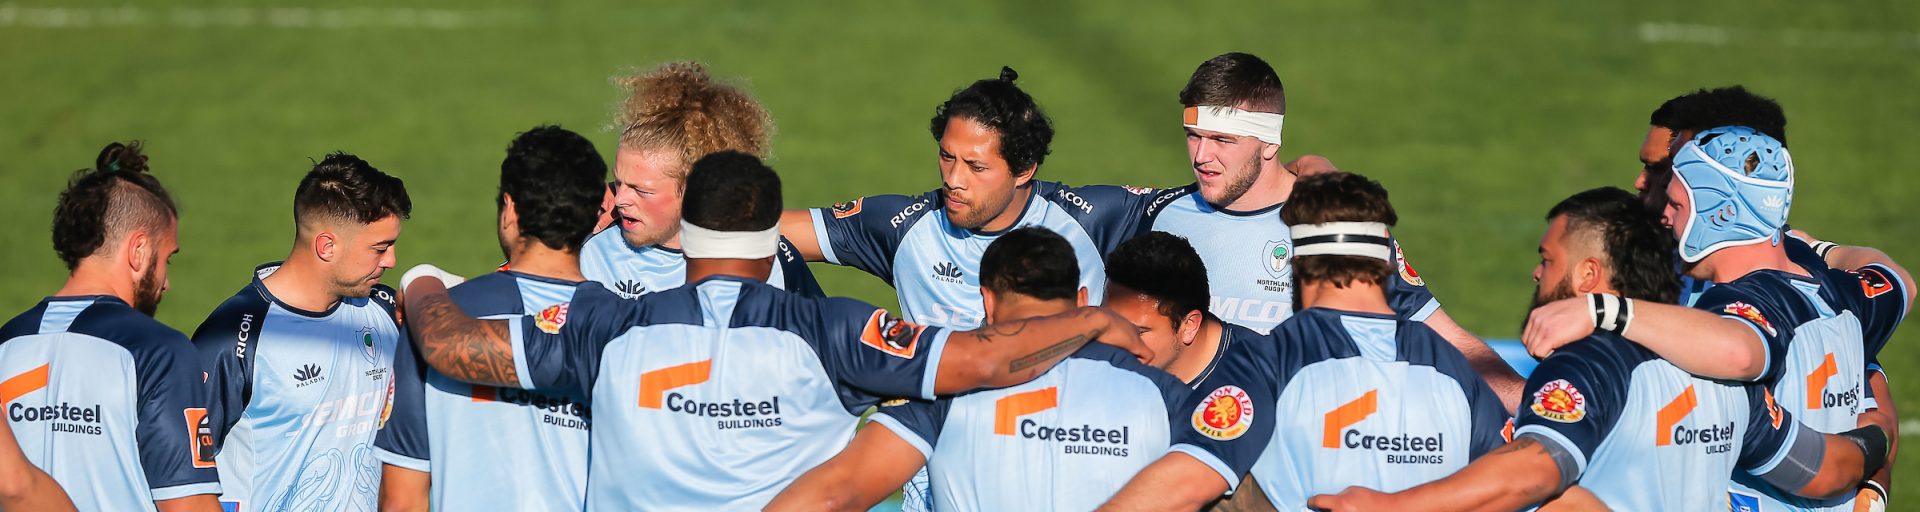 taniwha northland rugby team sponsored by coresteel